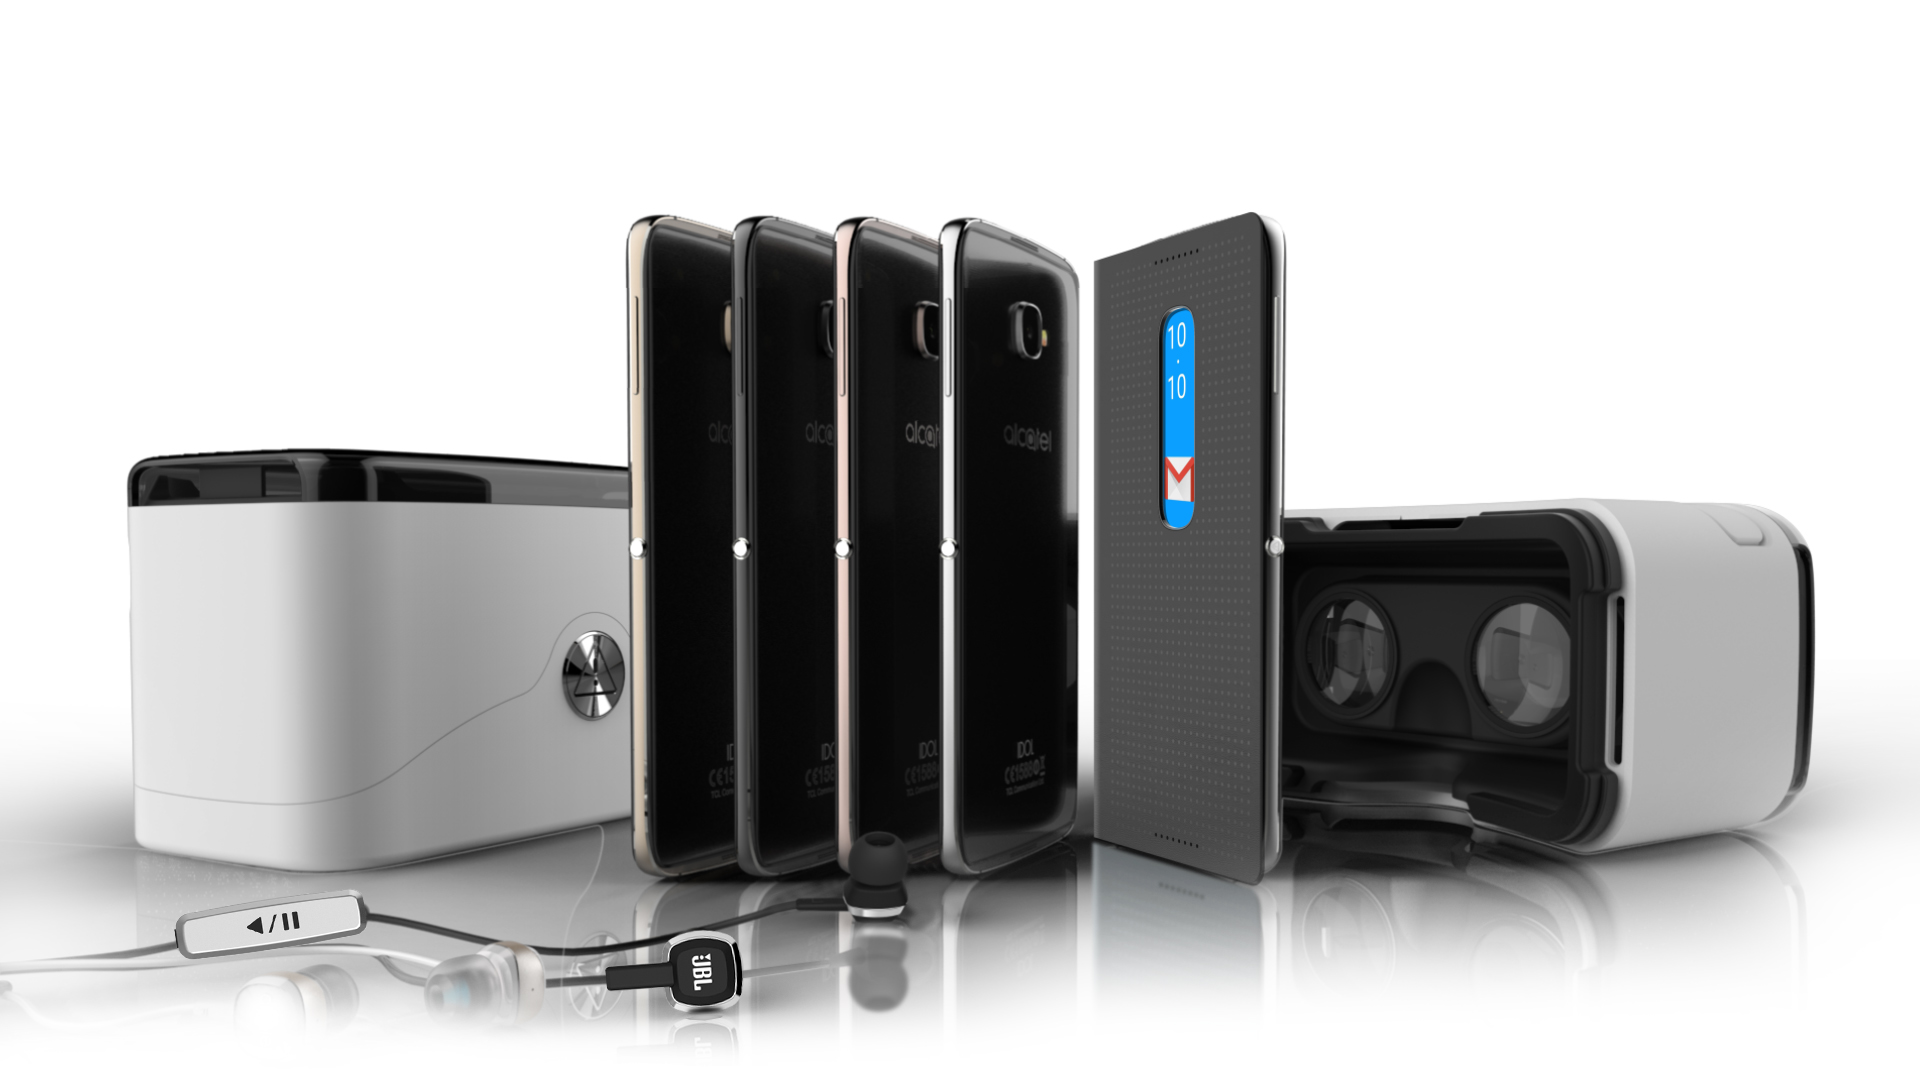 Windows 10 Mobile on Alcatel IDOL 4S with VR headset included at $288 with T-Mobile